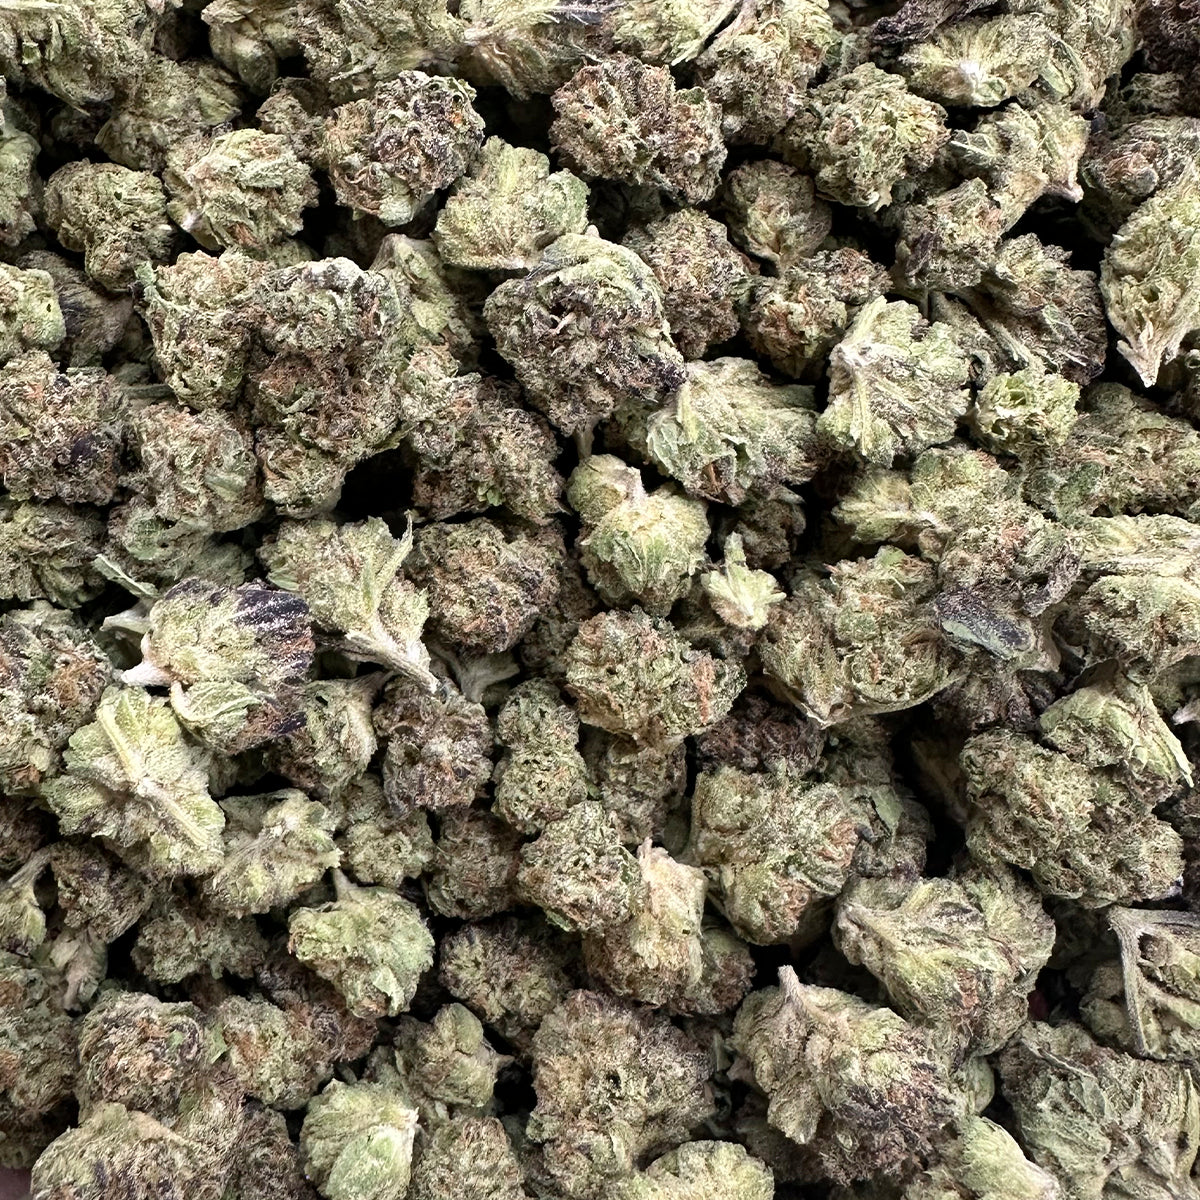 Purple Push Pop Smalls THCa Indica Premium Hemp Flower - This variety is a true hybrid with bright purple and green hues. A very earthy yet sweet aroma combined with soothing relaxing effects. Available in 14g size jars.